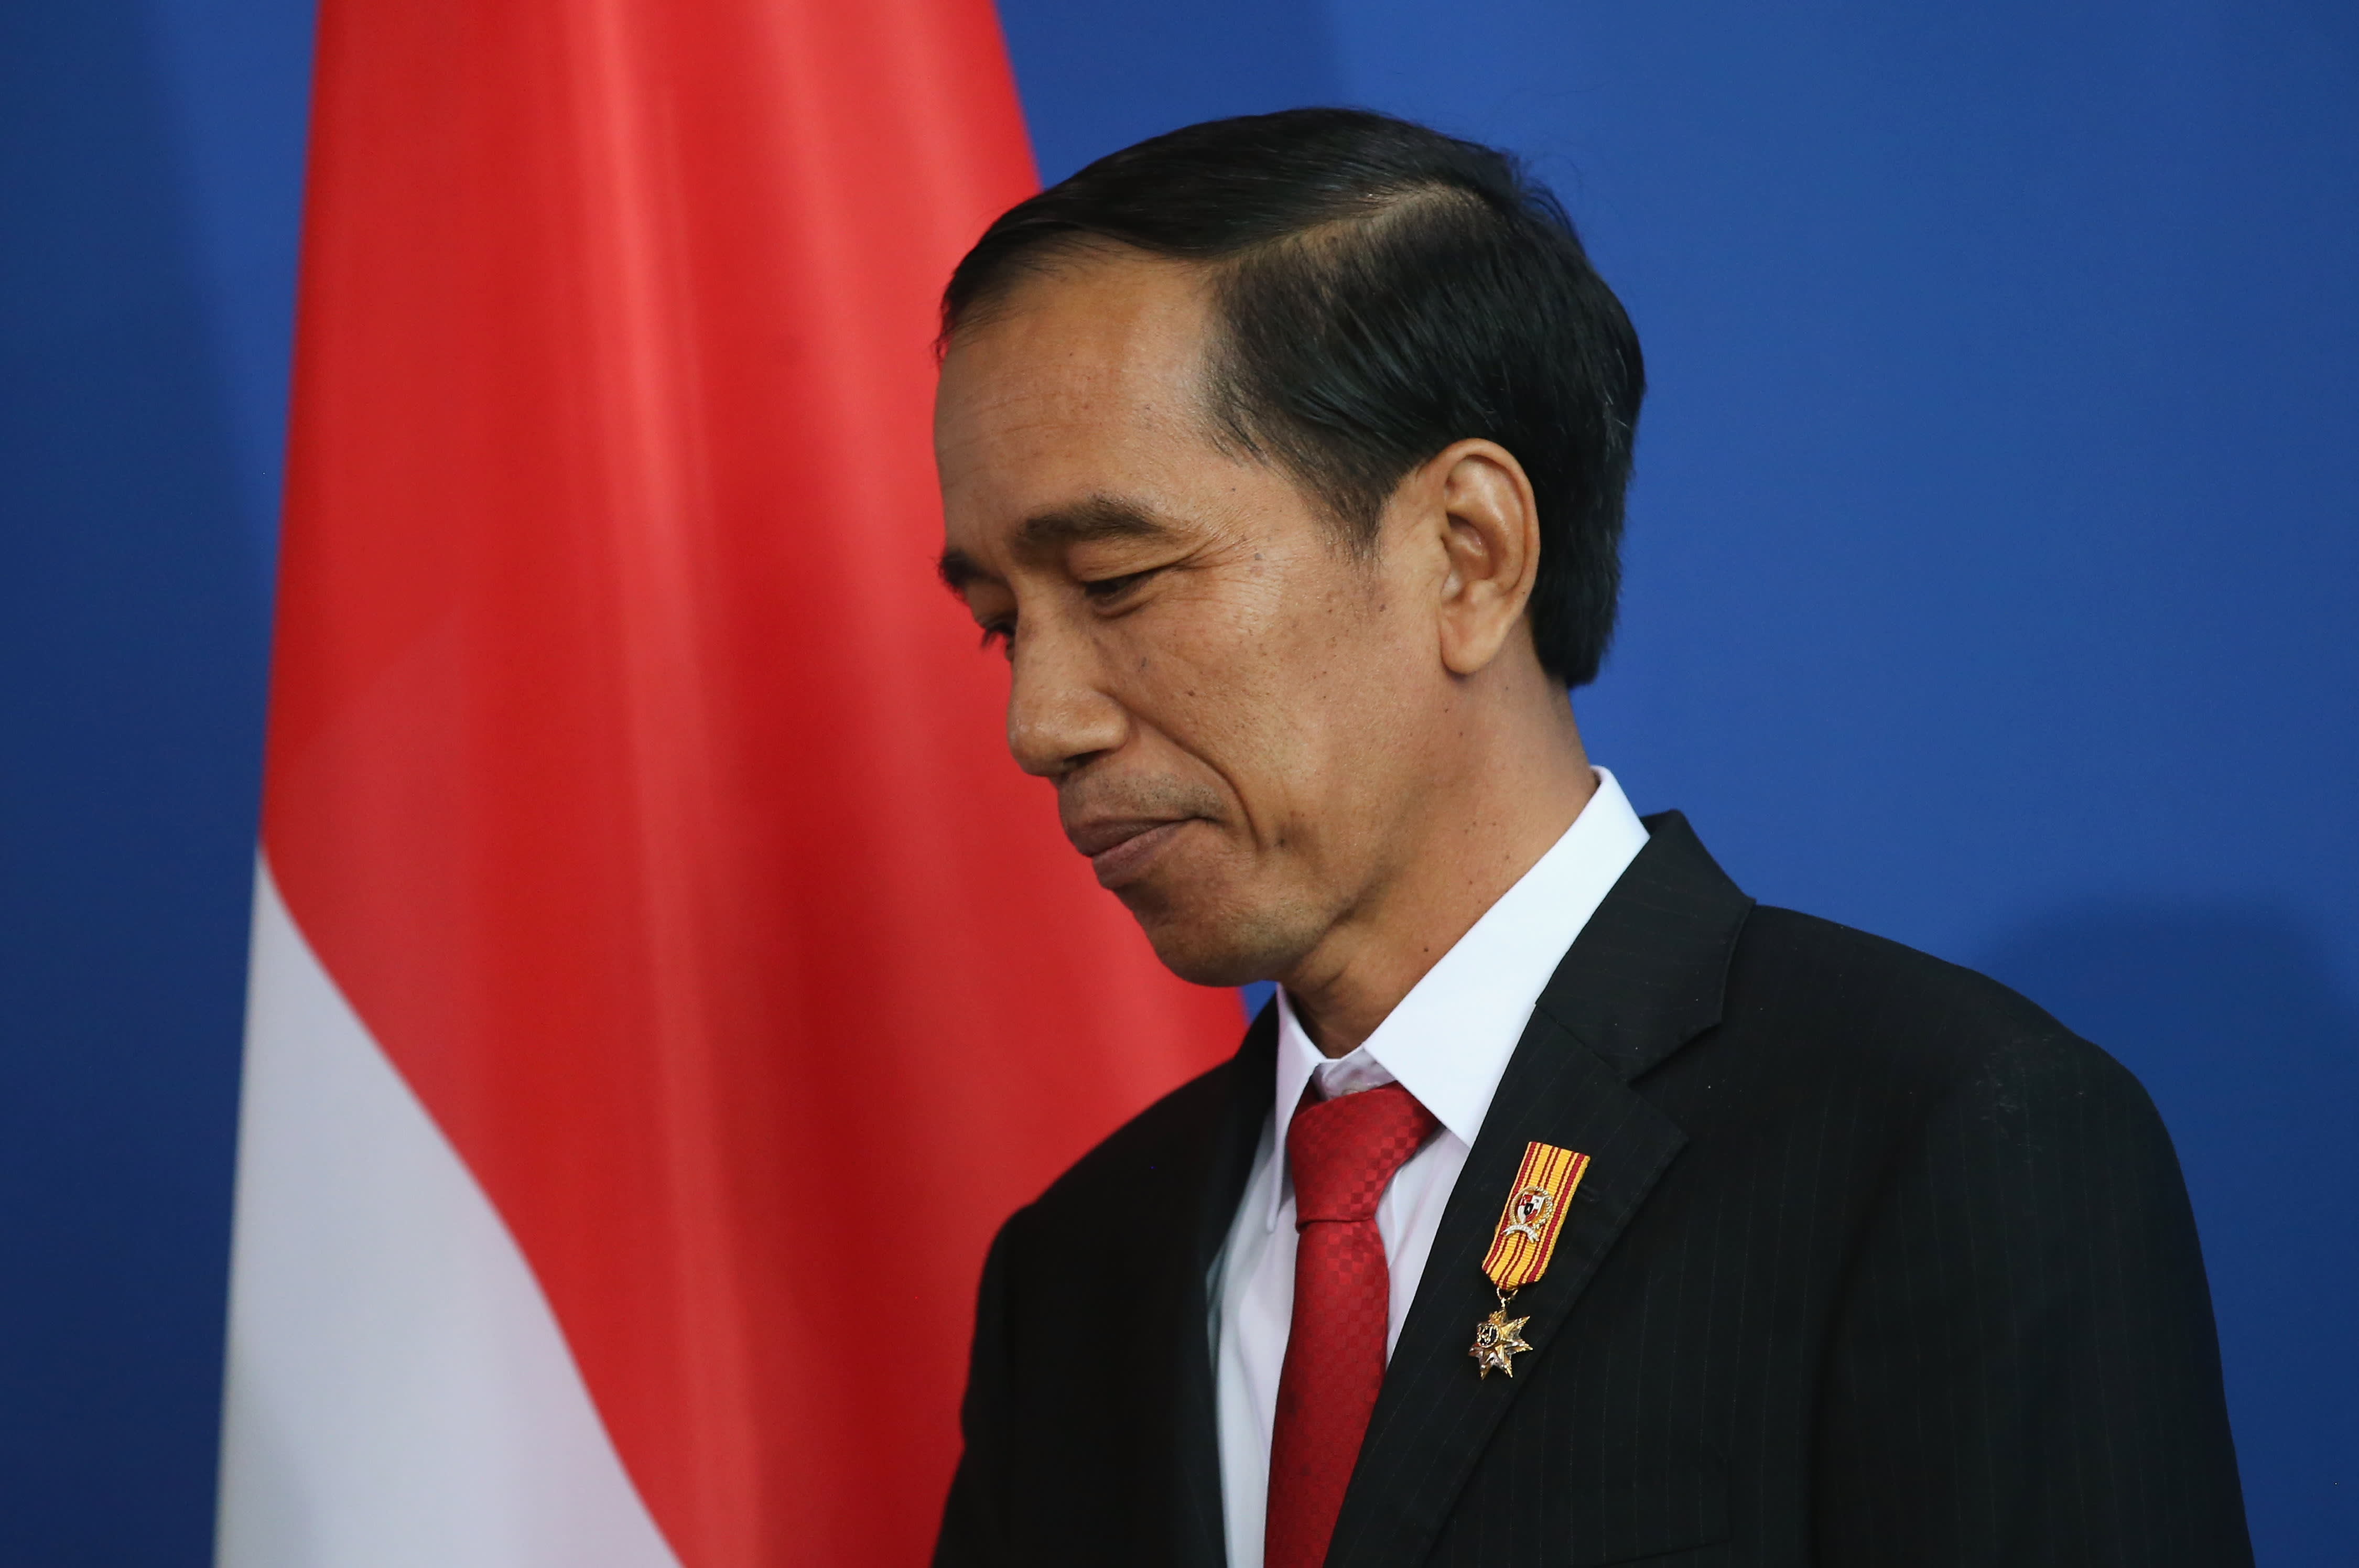 Indonesian President Jokowi celebrates 2 years in office with an eye on